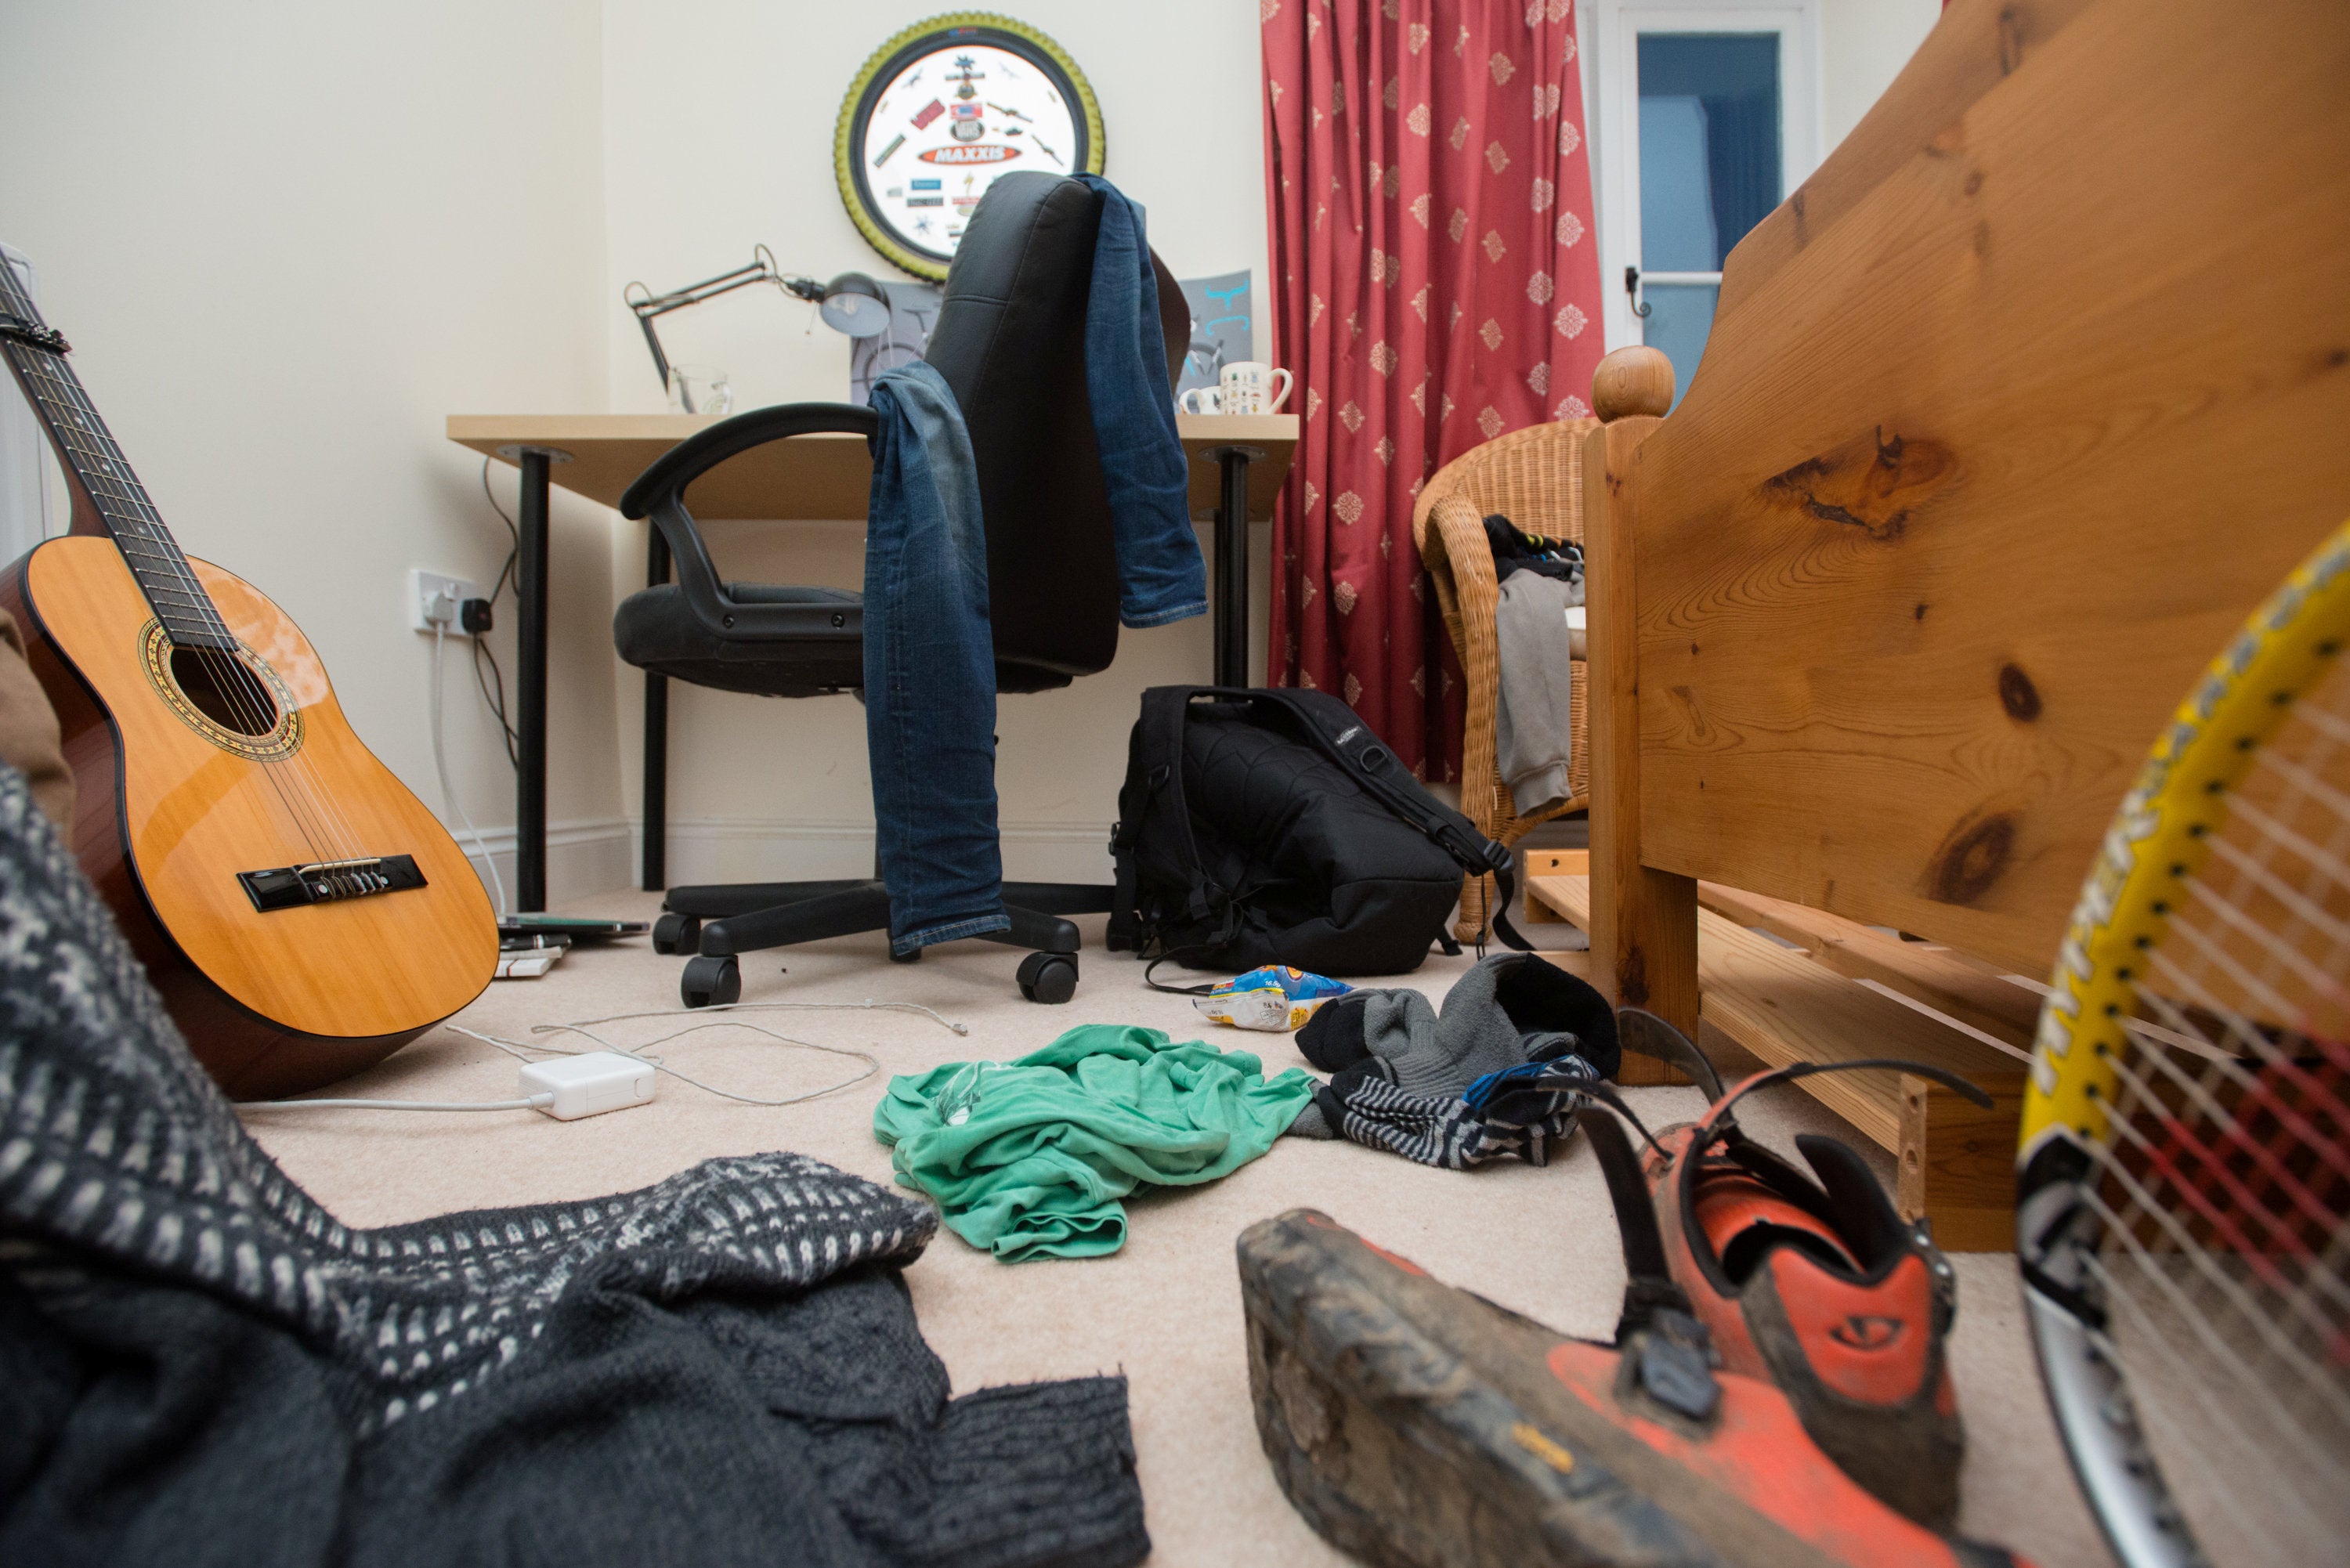 “We all have different levels of ‘clutter tolerance’ and this can inevitably cause some frictions in relationships if your partner’s view of a tidy home isn’t in line with yours”